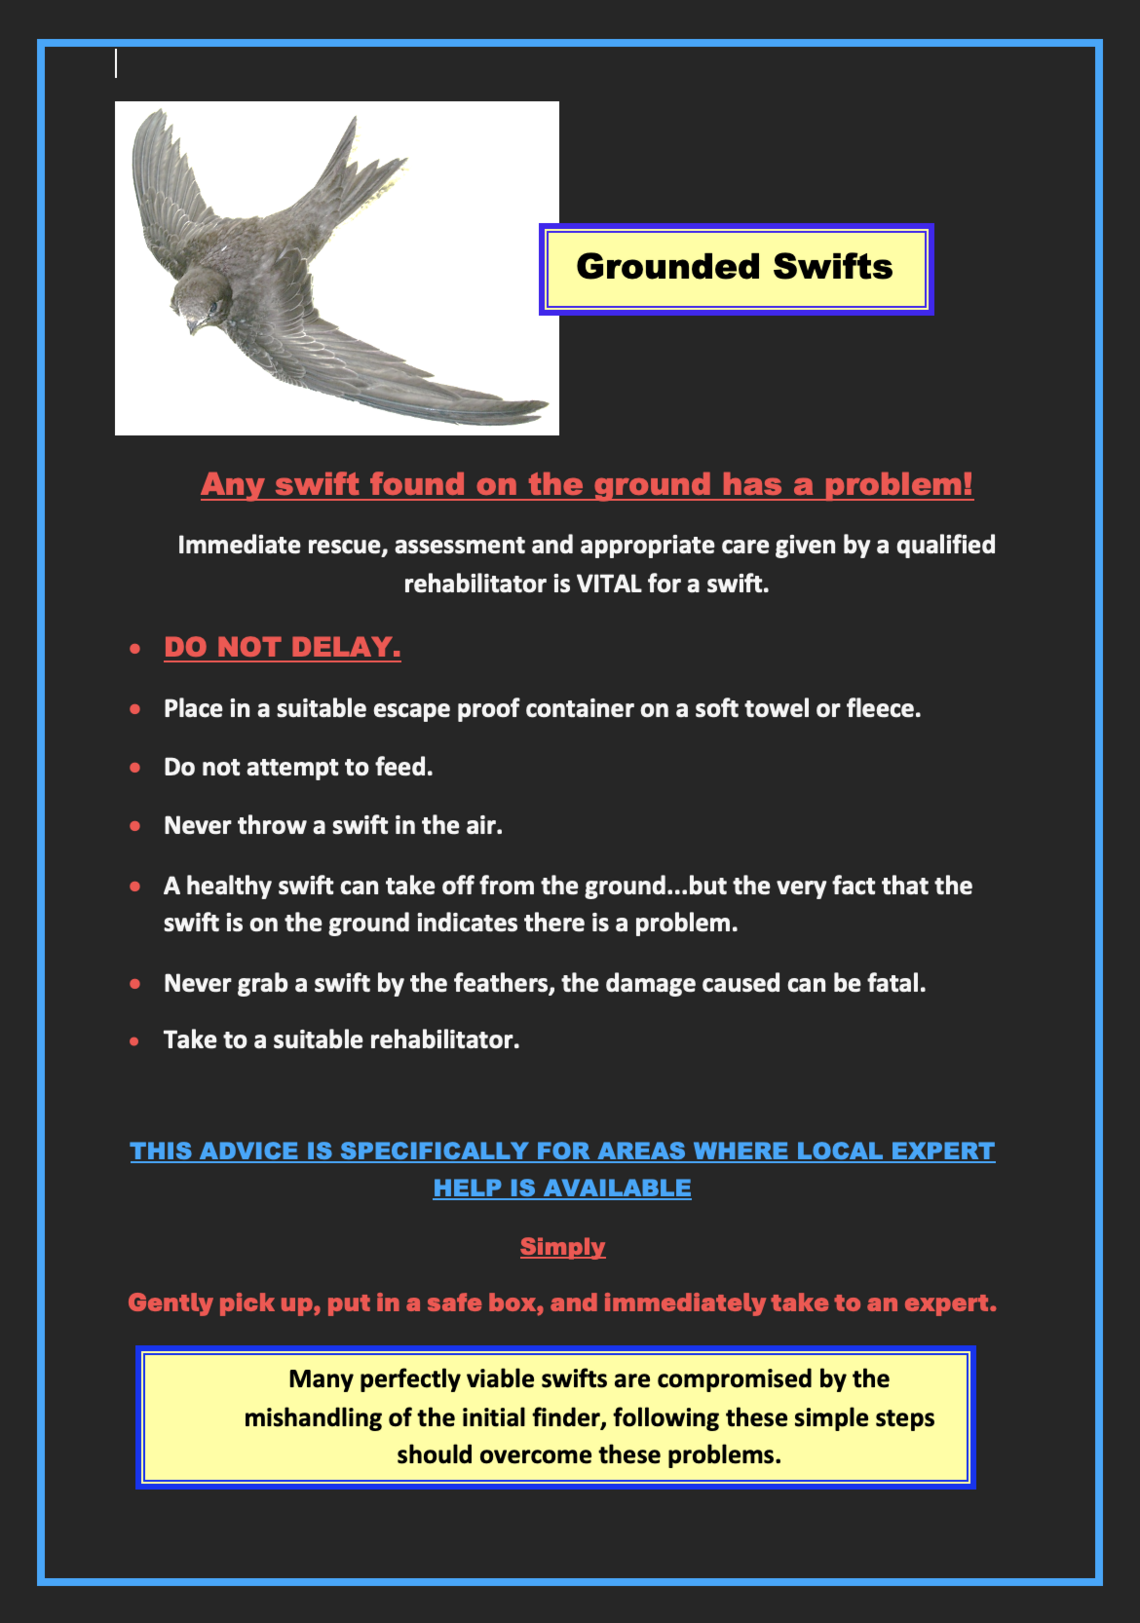 Instructions on how to immediately deal with a grounded Swift